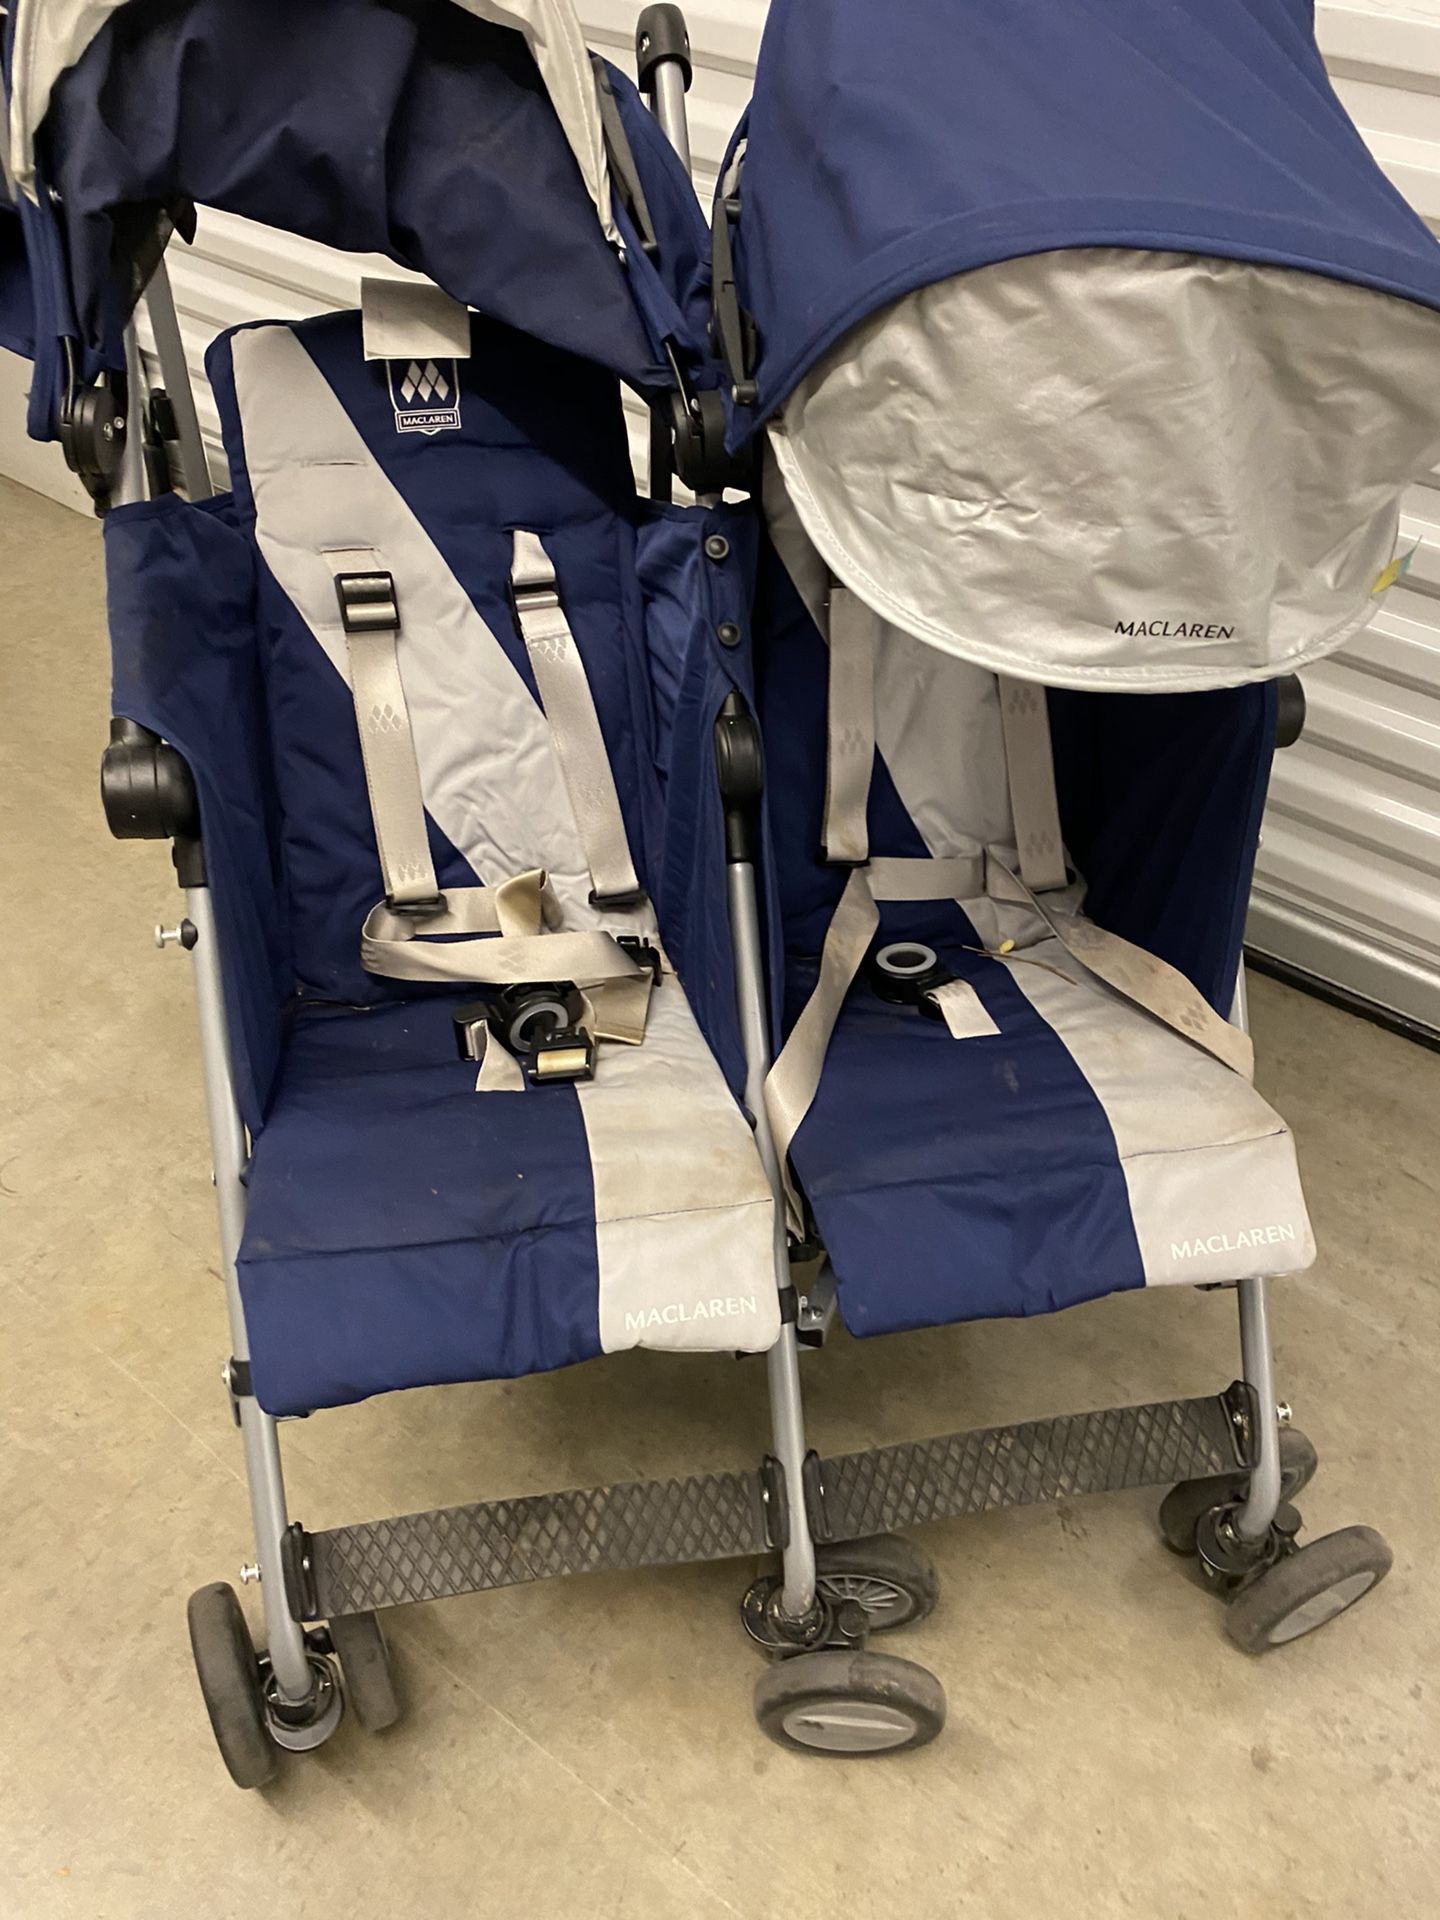 Maclaren - double stroller. Just need to be cleaned. Great condition- (pick up in Plano (75 and Spring Creek))